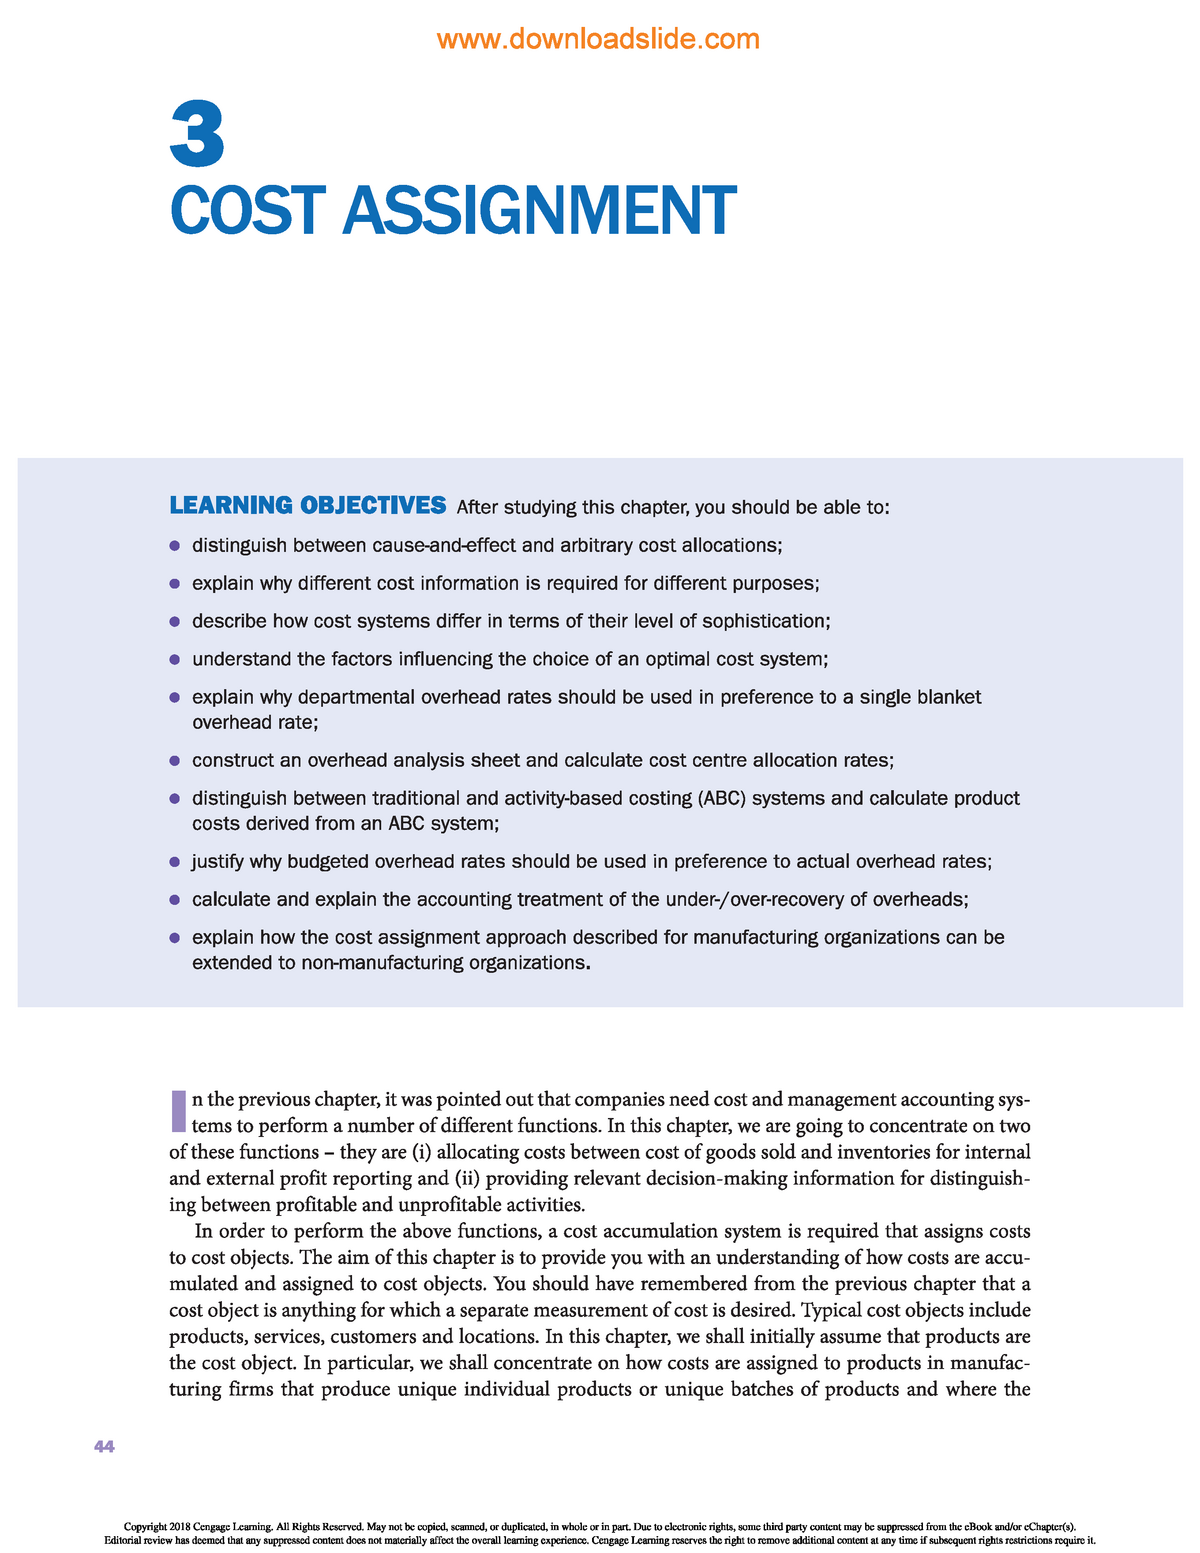 is cost assignment